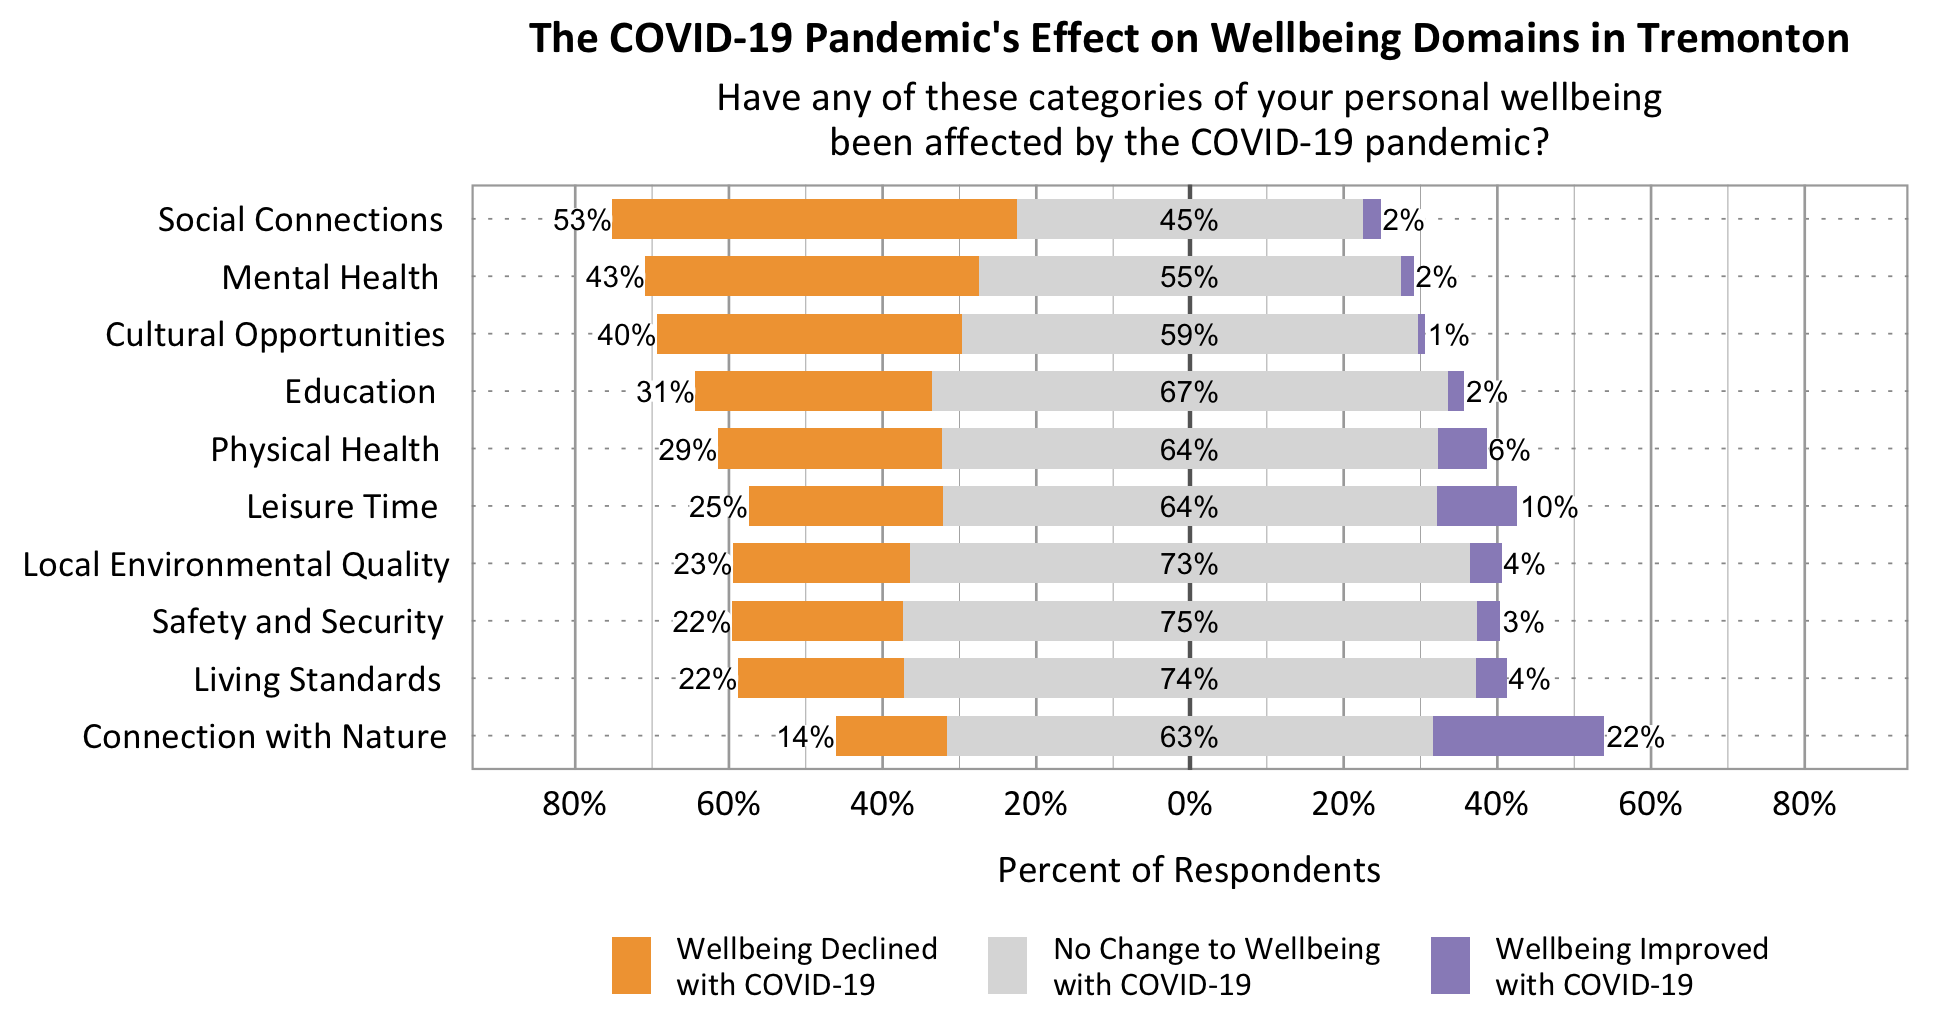 Likert Graph. Title: The COVID-19 Pandemic's effect on wellbeing domains in Tremonton. Subtitle: Have any of these categories of your personal wellbeing been affected by the COVID-19 pandemic? Data – Category: Social Connections- 53% of respondents rated wellbeing declined with COVID-19, 45% of respondents rated no change to wellbeing with COVID-19, 2% of respondents rated wellbeing improved with COVID-19; Category: Mental Health- 43% of respondents rated wellbeing declined with COVID-19, 55% of respondents rated no change to wellbeing with COVID-19, 2% of respondents rated wellbeing improved with COVID-19; Category: Cultural Opportunities- 40% of respondents rated wellbeing declined with COVID-19, 59% of respondents rated no change to wellbeing with COVID-19, 1% of respondents rated wellbeing improved with COVID-19; Category: Physical Health- 29% of respondents rated wellbeing declined with COVID-19, 64% of respondents rated no change to wellbeing with COVID-19, 6% of respondents rated wellbeing improved with COVID-19; Category: Leisure Time - 25% of respondents rated wellbeing declined with COVID-19, 64% of respondents rated no change to wellbeing with COVID-19, 10% of respondents rated wellbeing improved with COVID-19; Category: Education- 31% of respondents rated wellbeing declined with COVID-19, 67% of respondents rated no change to wellbeing with COVID-19, 2% of respondents rated wellbeing improved with COVID-19; Category: Living Standards- 22% of respondents rated wellbeing declined with COVID-19, 74% of respondents rated no change to wellbeing with COVID-19, 4% of respondents rated wellbeing improved with COVID-19; Category: Connection with Nature- 14% of respondents rated wellbeing declined with COVID-19, 63% of respondents rated no change to wellbeing with COVID-19, 22% of respondents rated wellbeing improved with COVID-19; Category: Local Environmental Quality- 23% of respondents rated wellbeing declined with COVID-19, 73% of respondents rated no change to wellbeing with COVID-19, 4% of respondents rated wellbeing improved with COVID-19; Category:  Safety and Security- 22% of respondents rated wellbeing declined with COVID-19, 75% of respondents rated no change to wellbeing with COVID-19, 3% of respondents rated wellbeing improved with COVID-19.